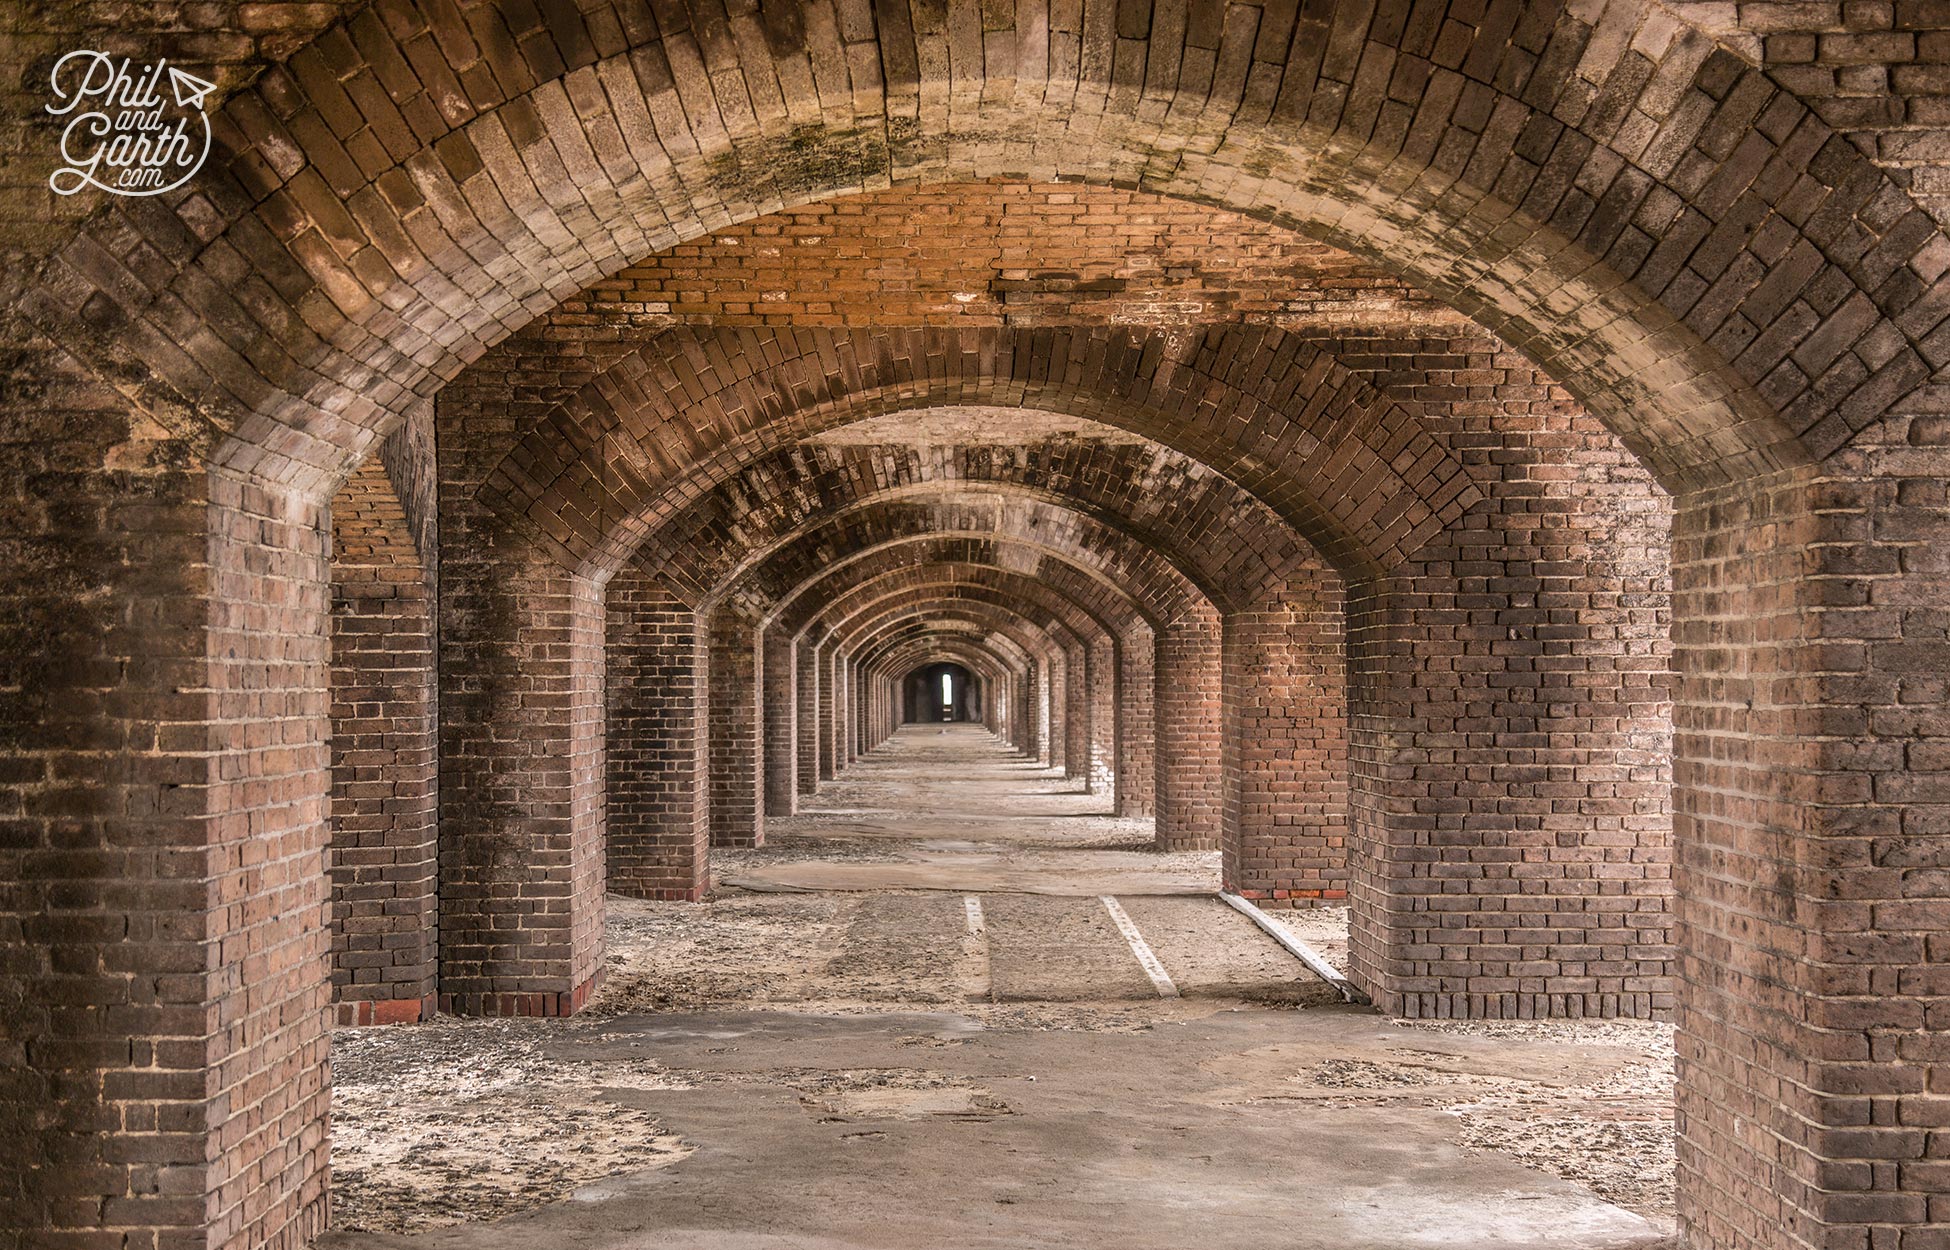 Inside the casemate rooms, there are over 2,000 arches at Fort Jefferson